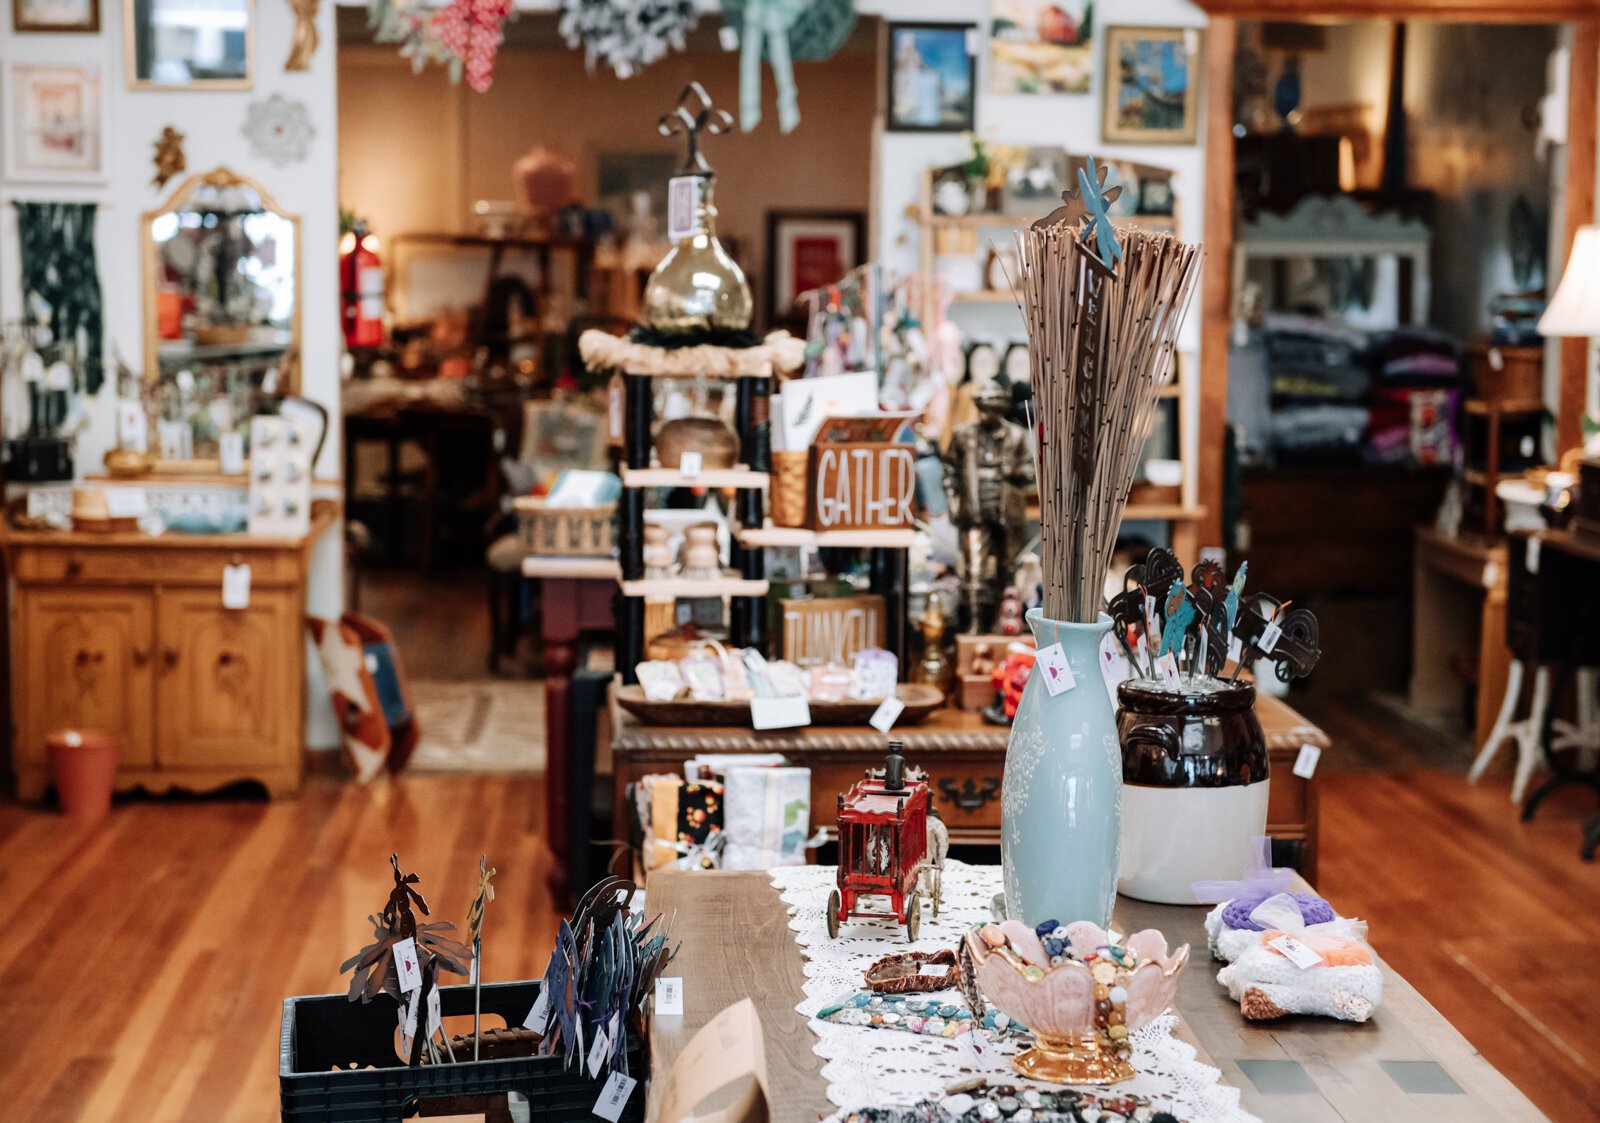 The Eclectic Shoppe features a lot of handmade and artistic goods at 42 W Canal St, Wabash, IN.